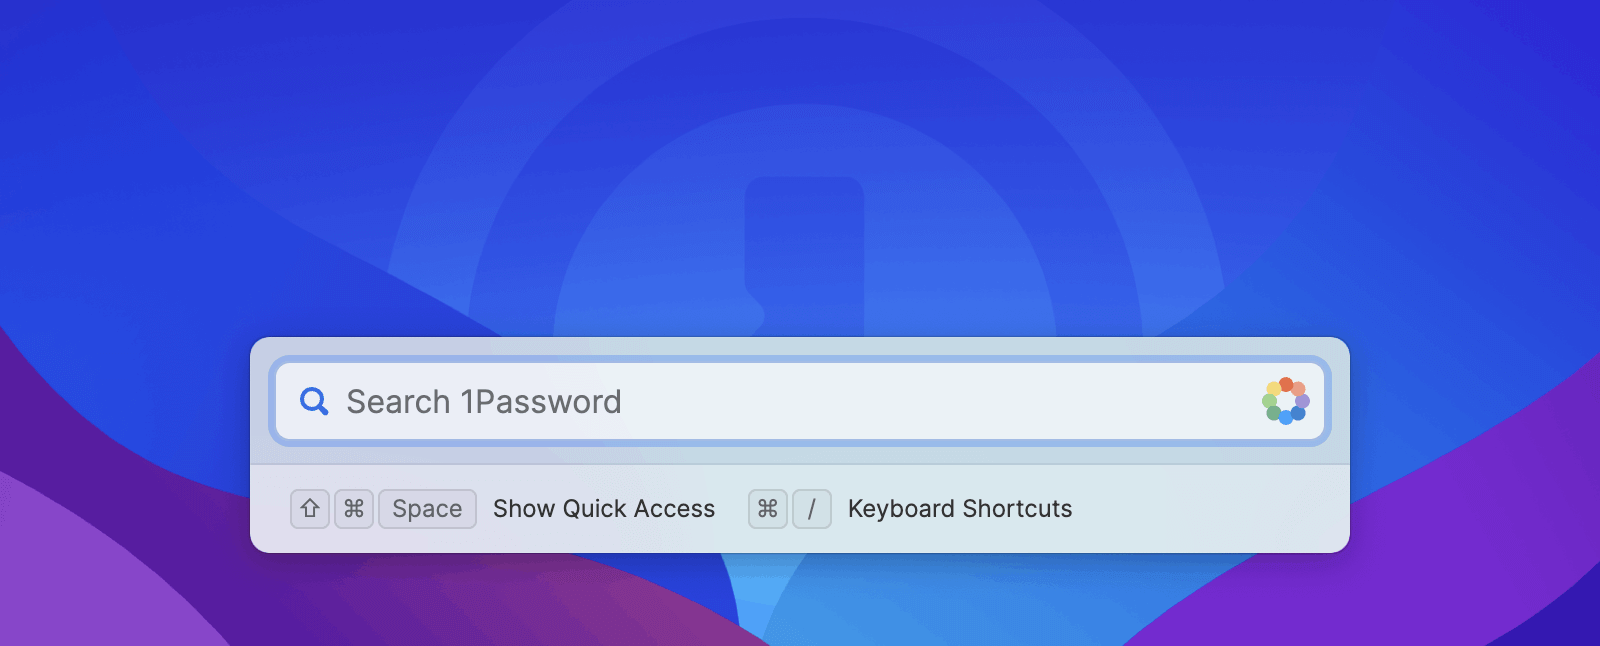 1Password Quick Access window open, awaiting your command.